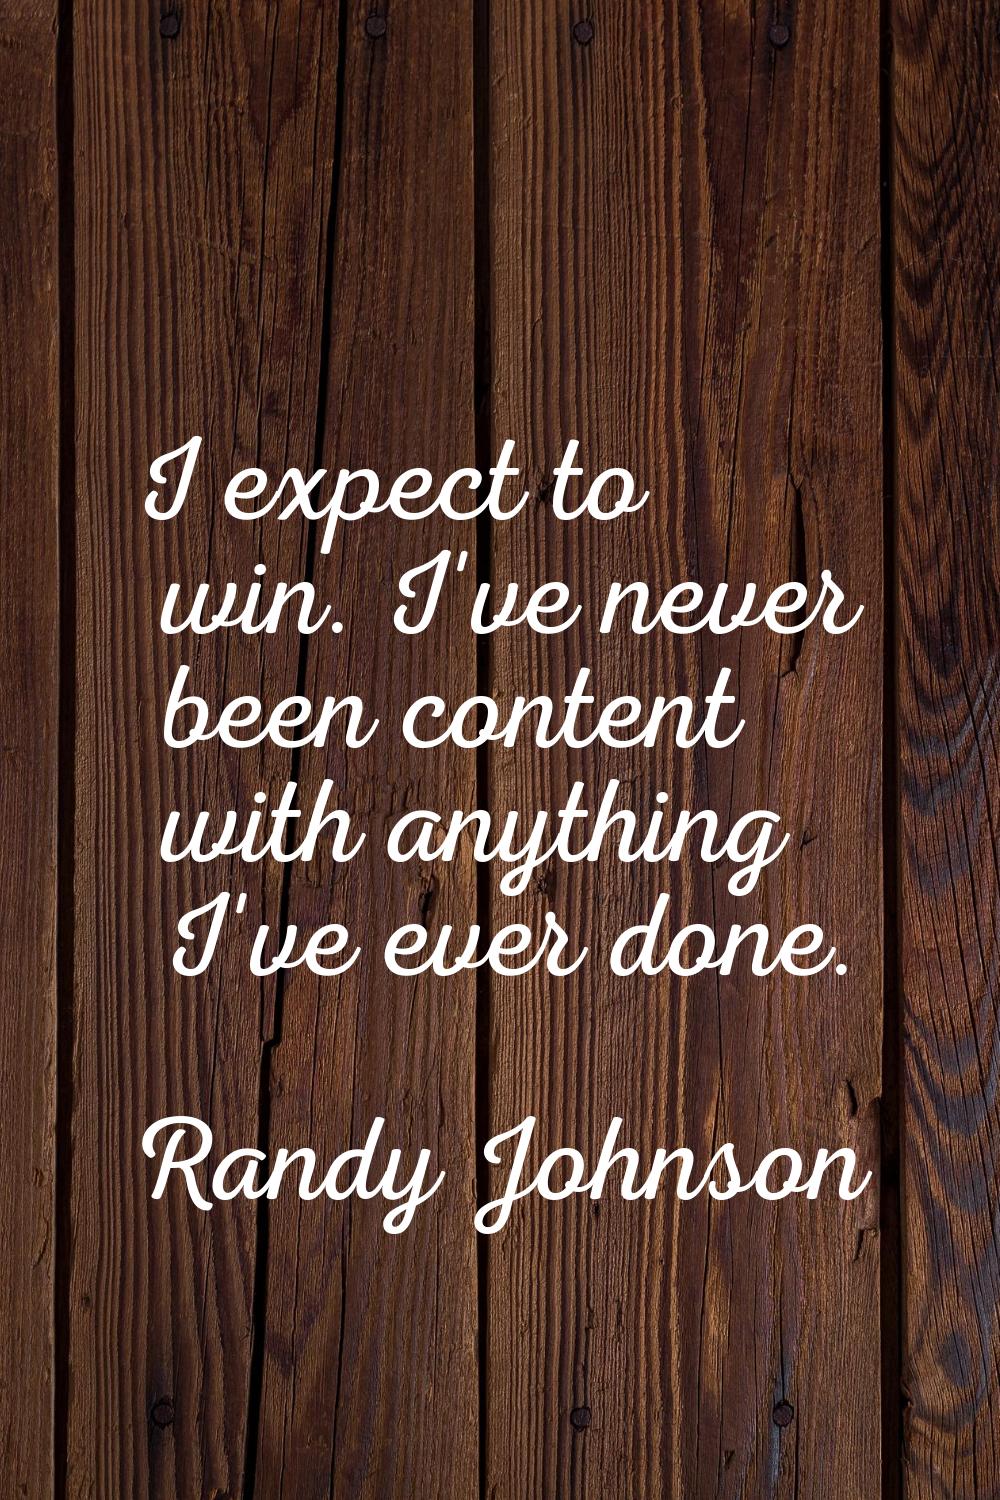 I expect to win. I've never been content with anything I've ever done.